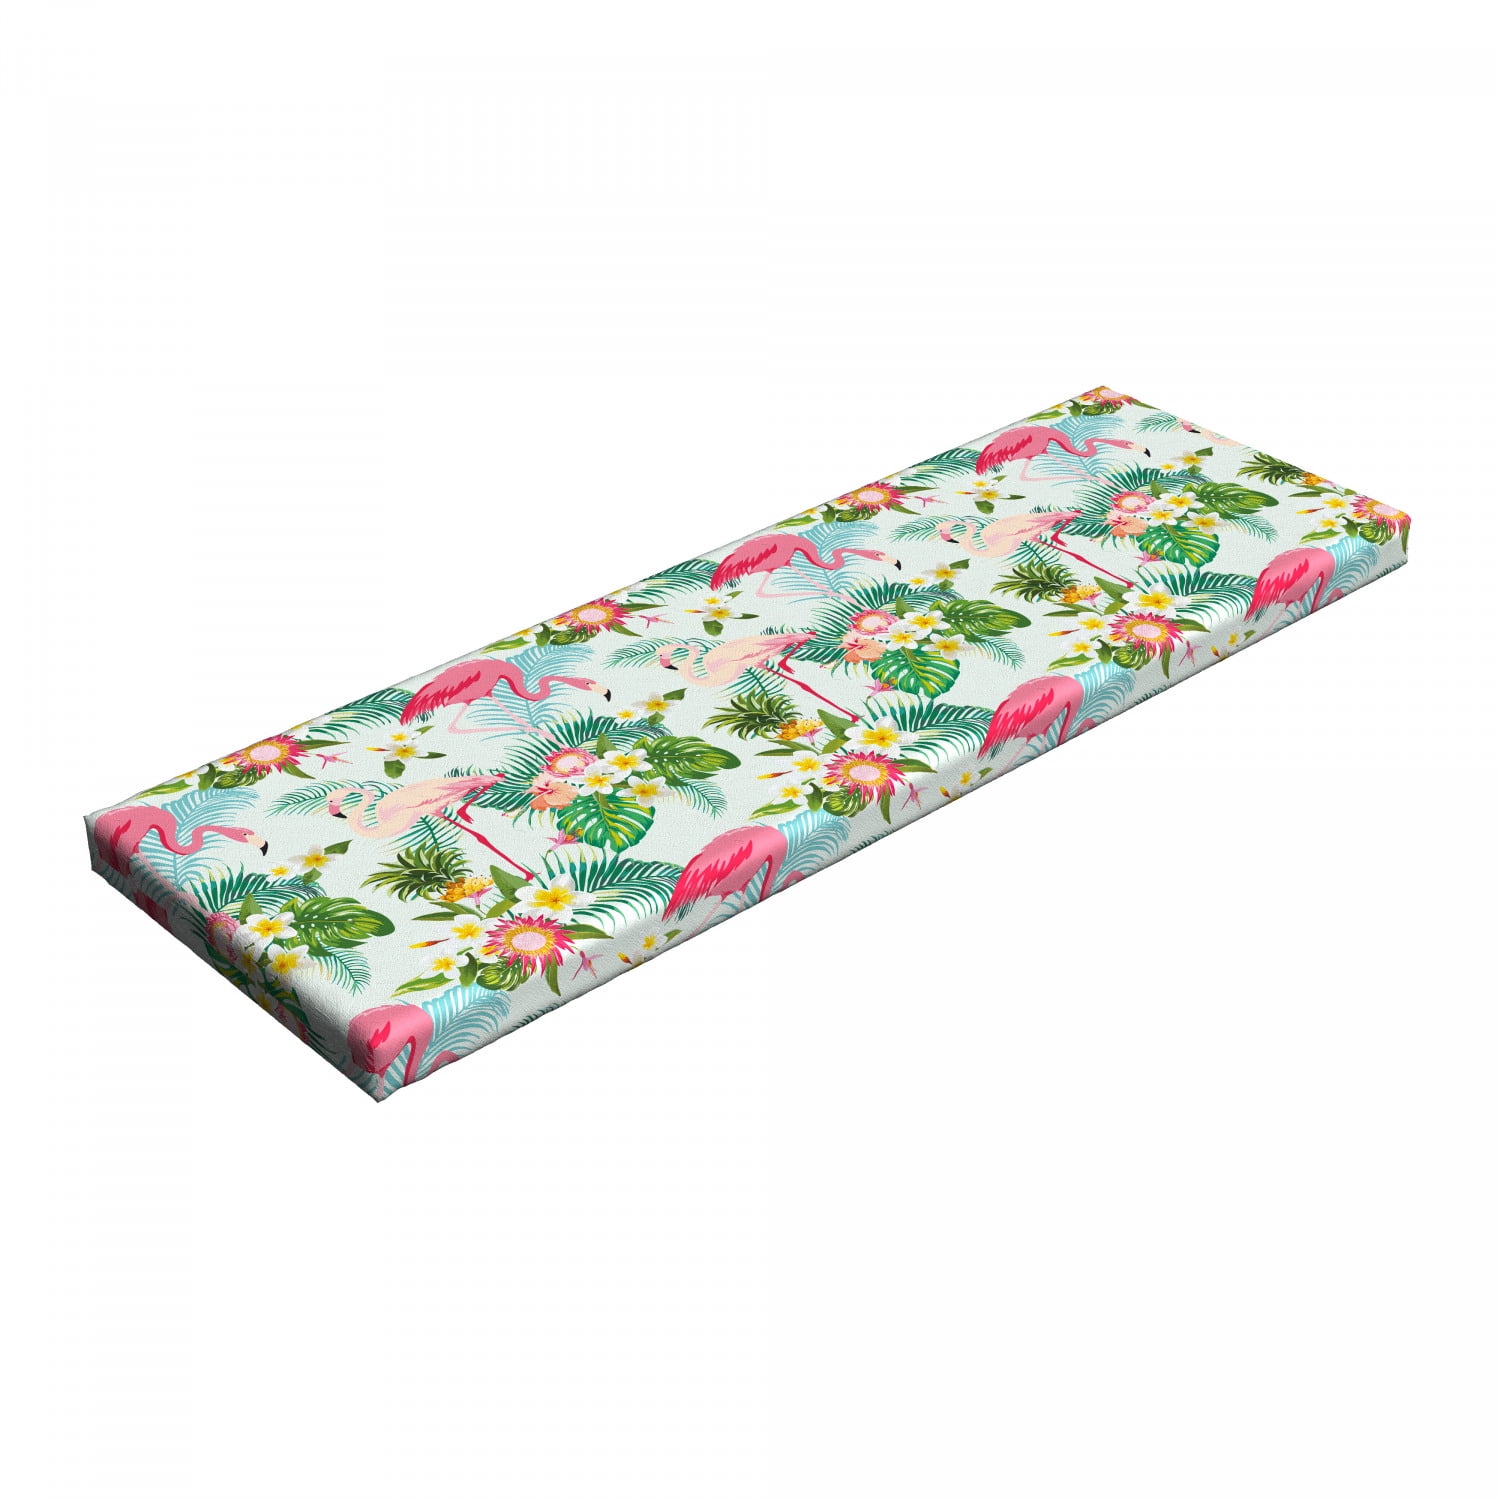 Pas op Automatisch Verdienen Flamingo Bench Pad, Fresh Exotic Jungle Rainforest Island Climate Wildlife  Fauna Leaves and Blossoms, HR Foam Cushion with Decorative Fabric Cover,  45" x 15" x 2", Multicolor, by Ambesonne - Walmart.com